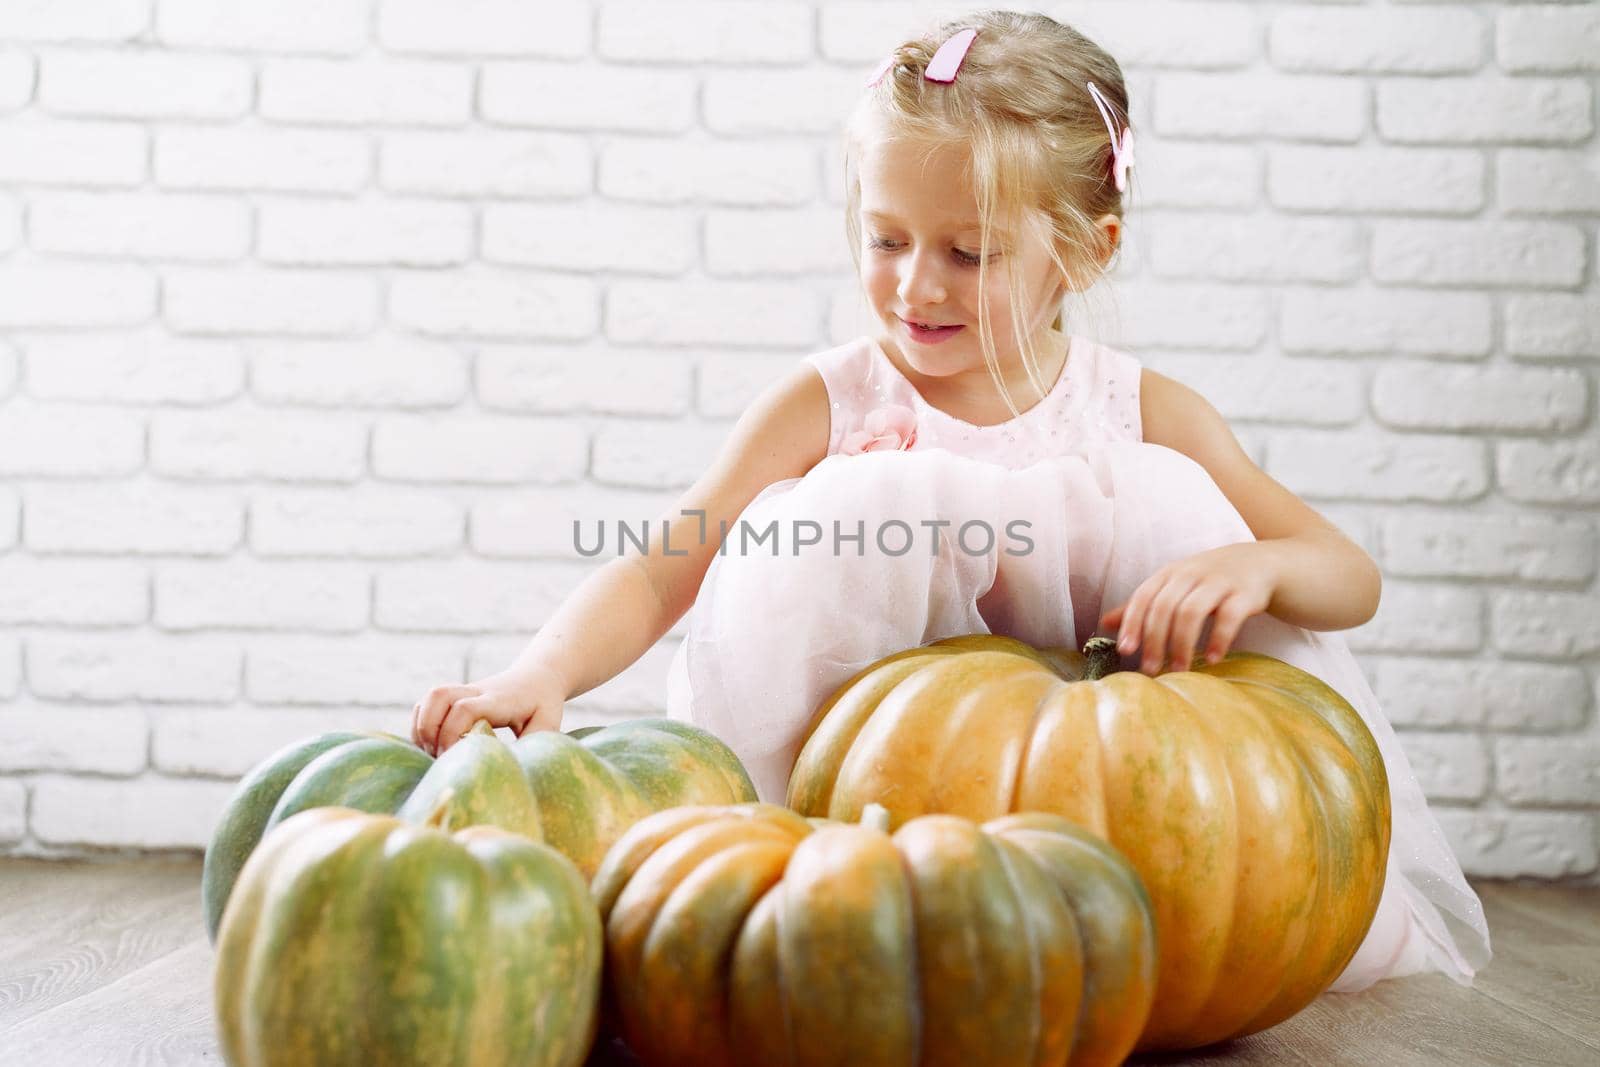 Little girl in pink dress sitting on wooden floor and playing with pile of big pumpkins